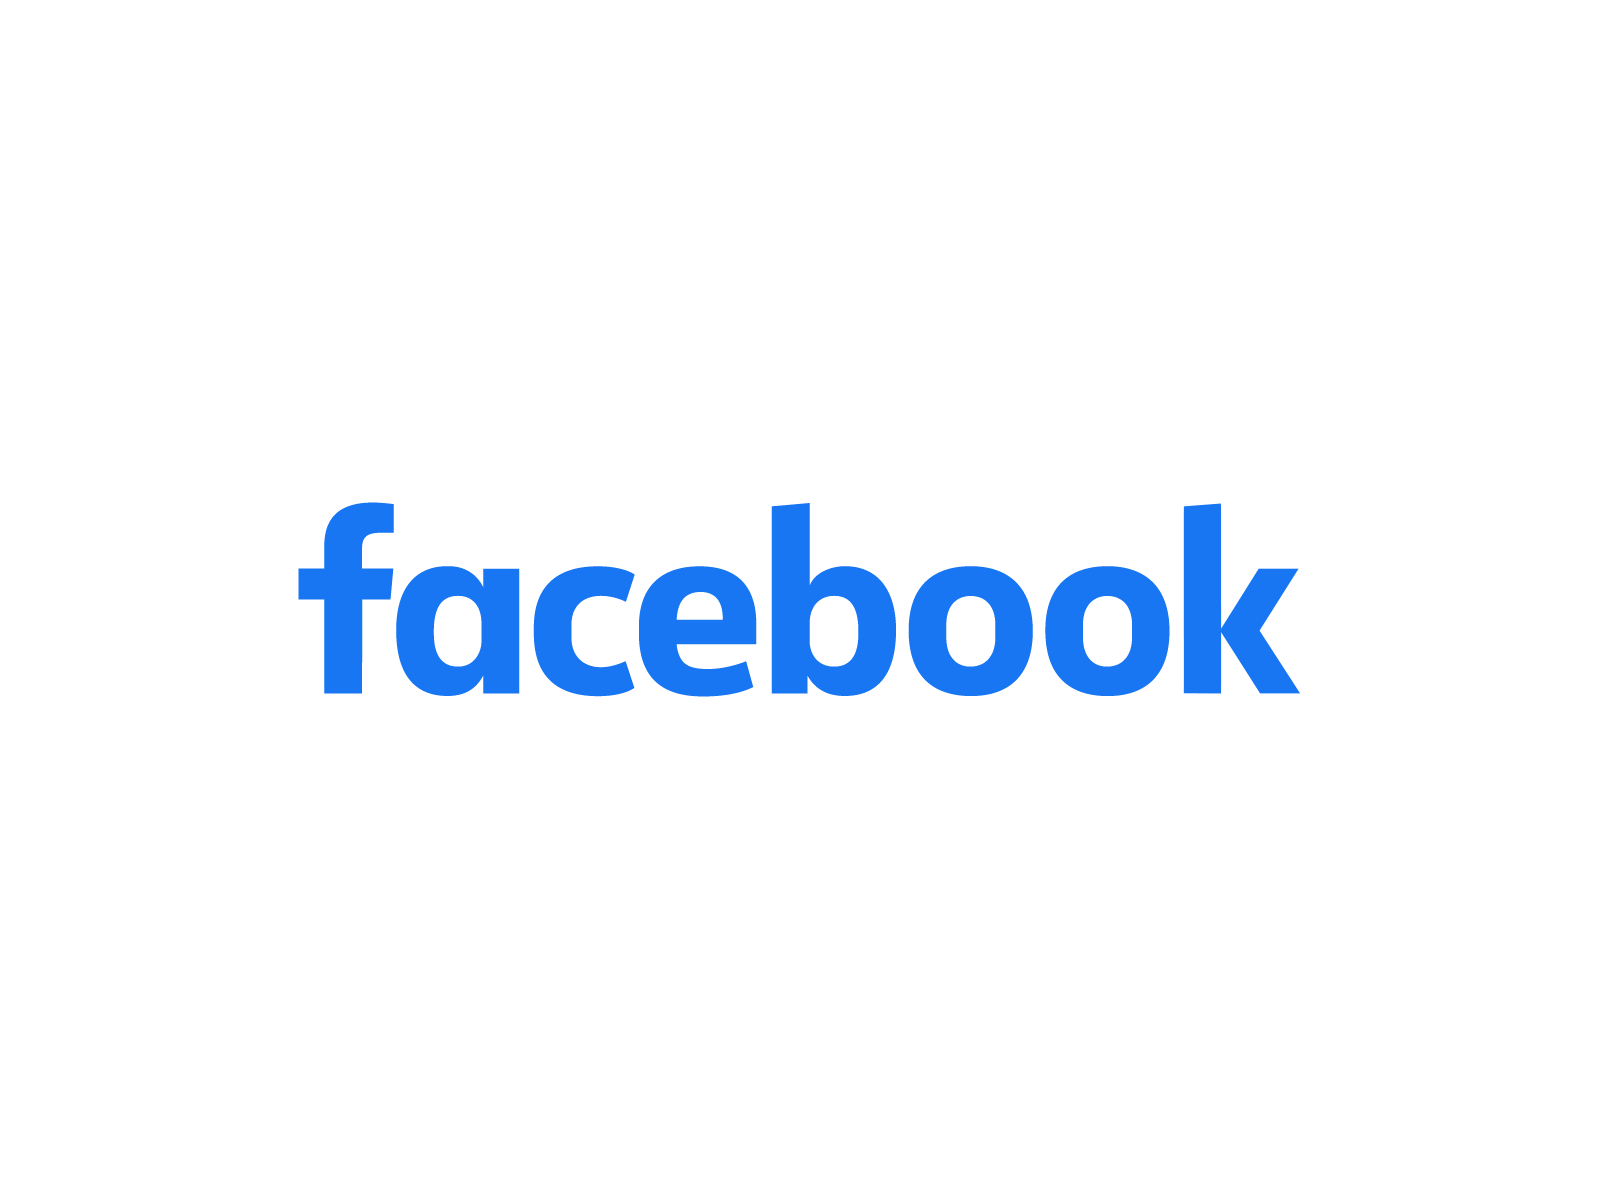 facebook-logo-animation-by-quang-nguyen-on-dribbble